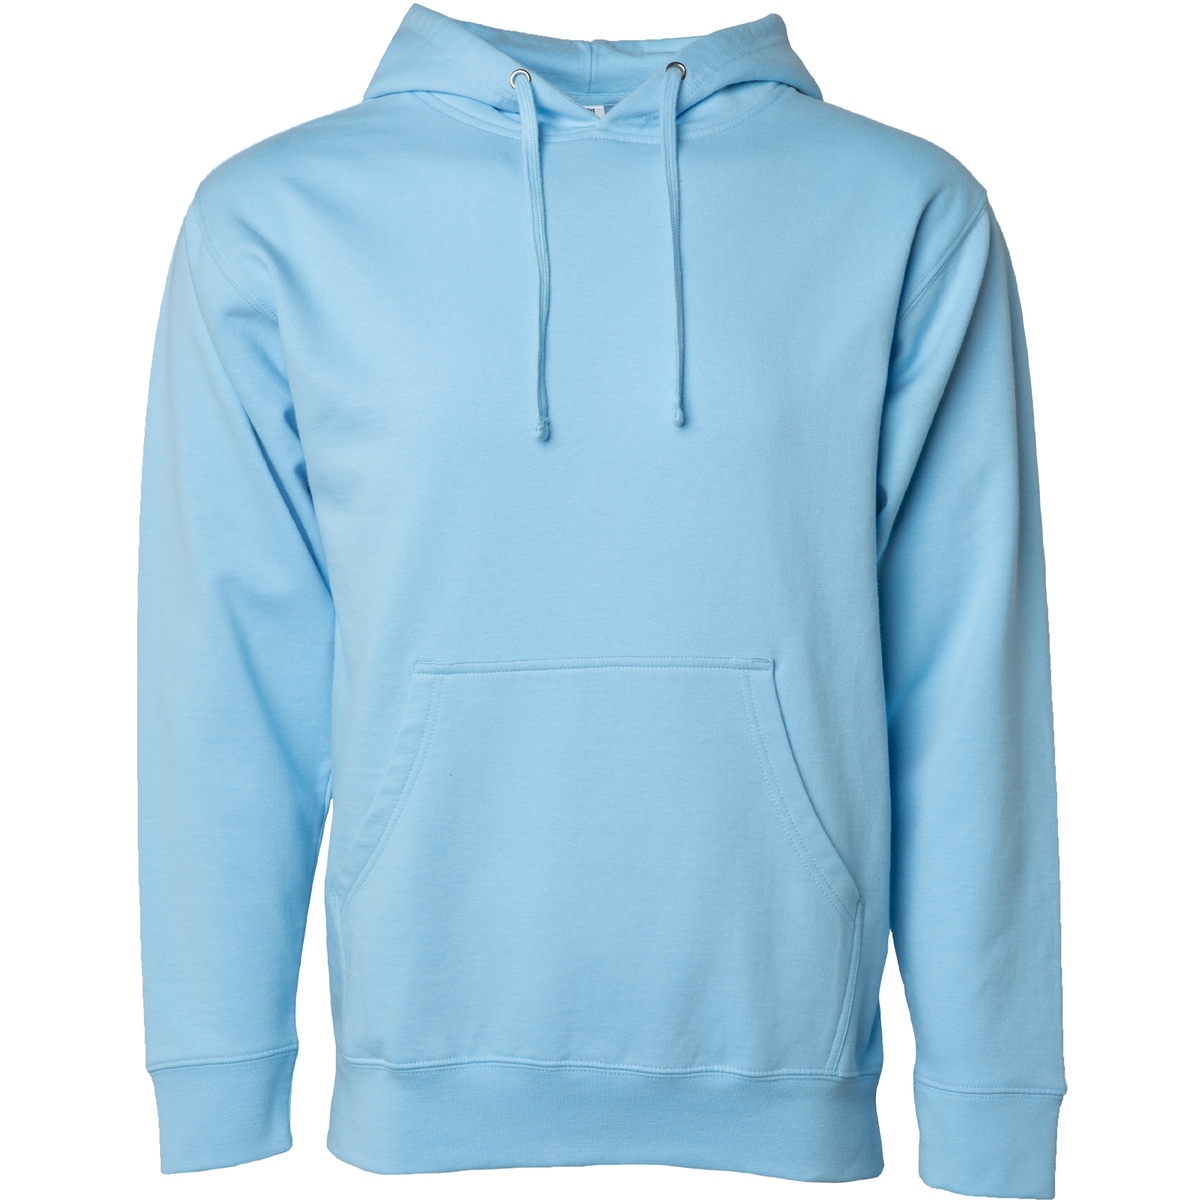 SS4500 - Midweight Hooded Pullover Sweatshirt